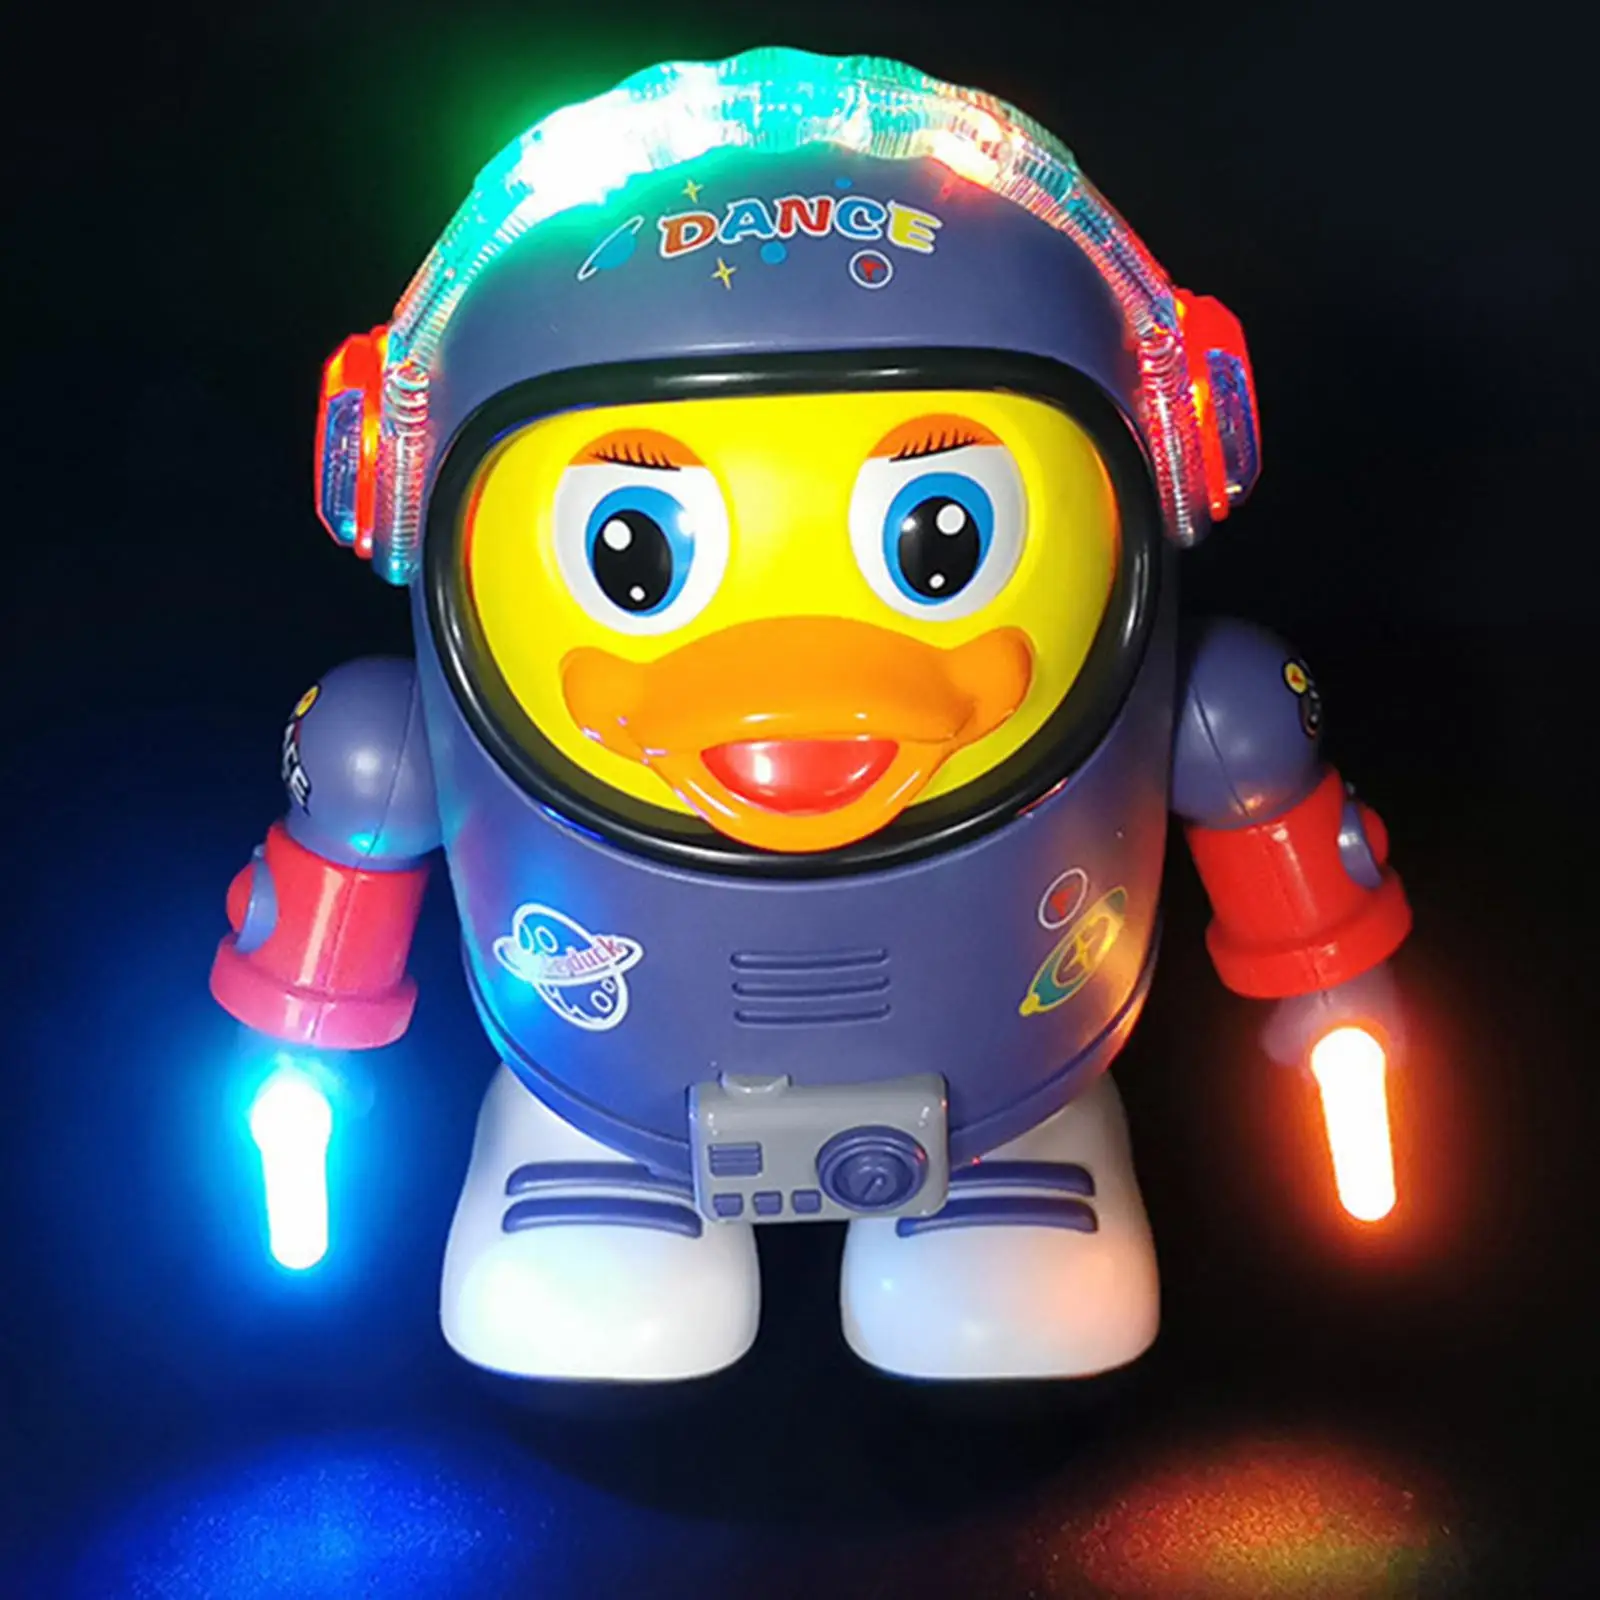 Baby Electric Dancing Duck Toy Battery Powered Electric Walking Duck Toy with Sounds Kids Toy Gift